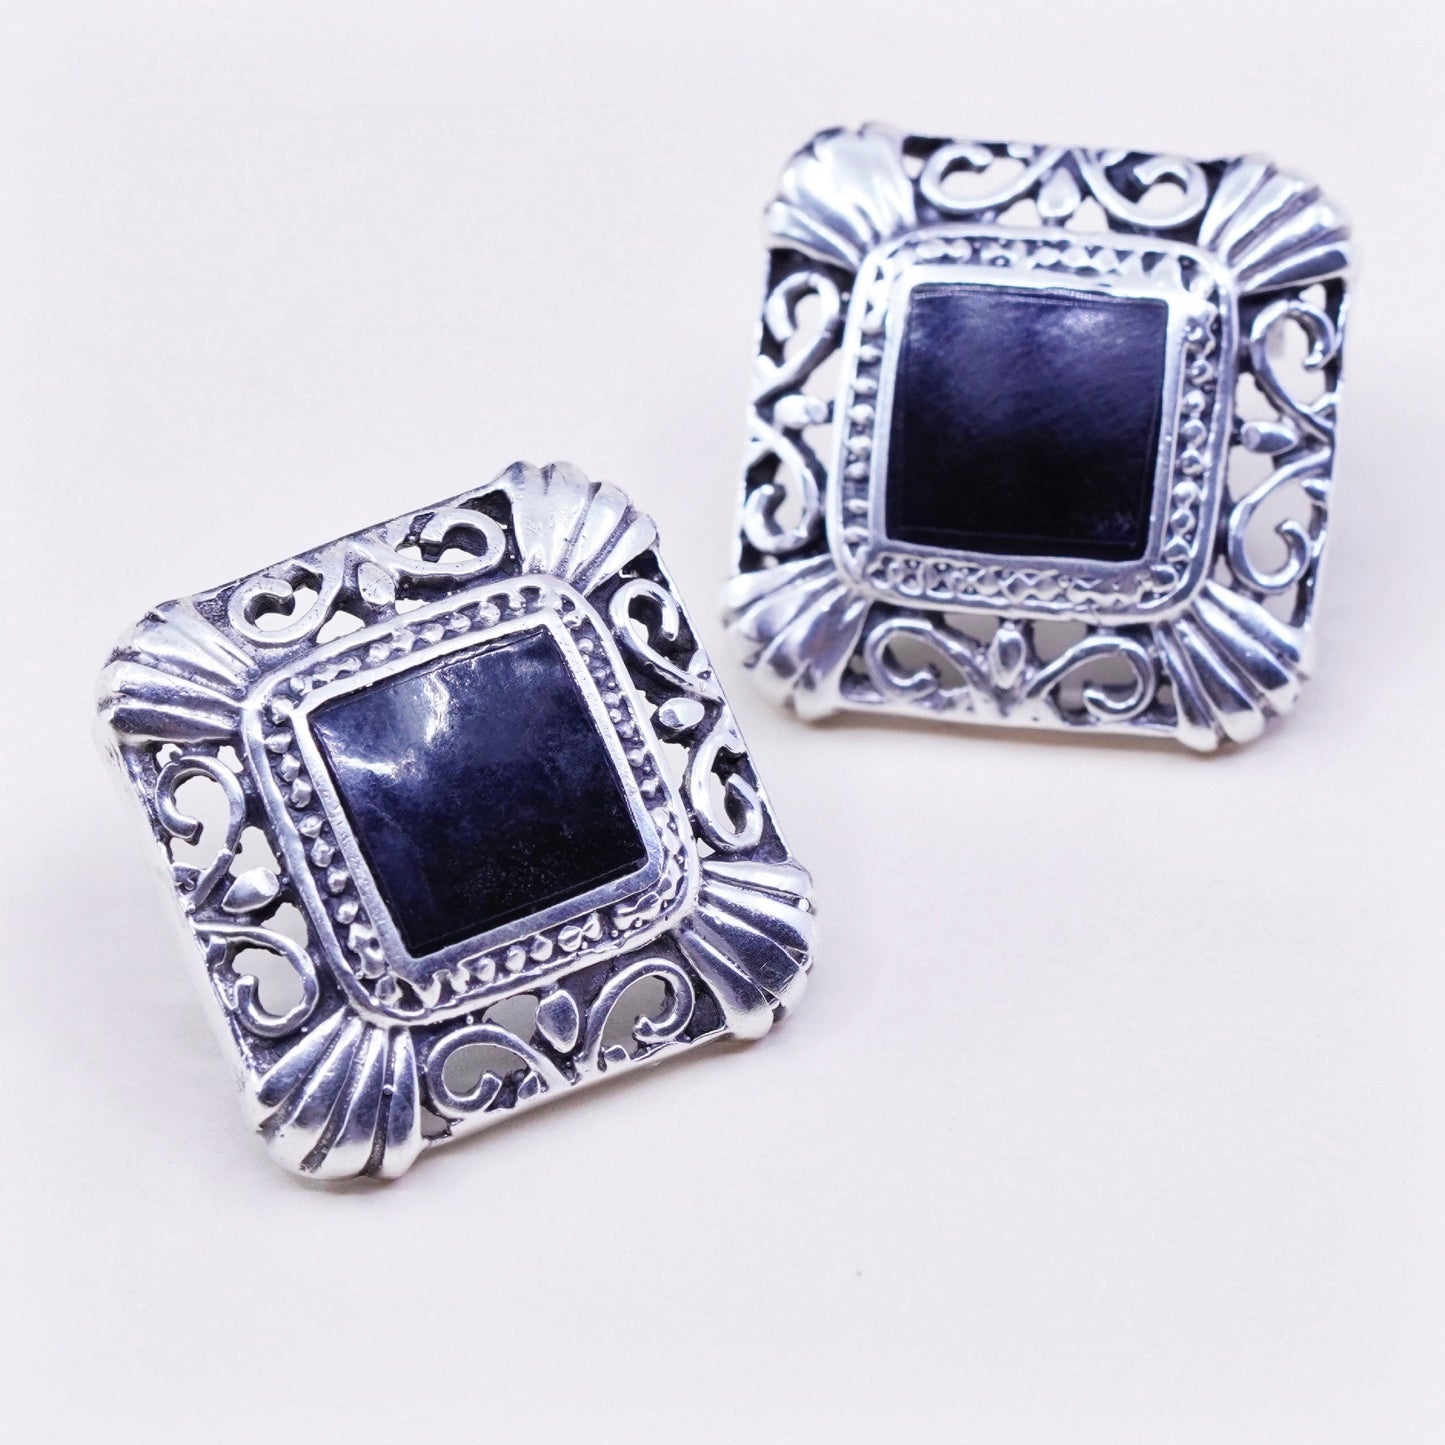 Vintage Sterling silver handmade earrings, filigree 925 studs with square onyx